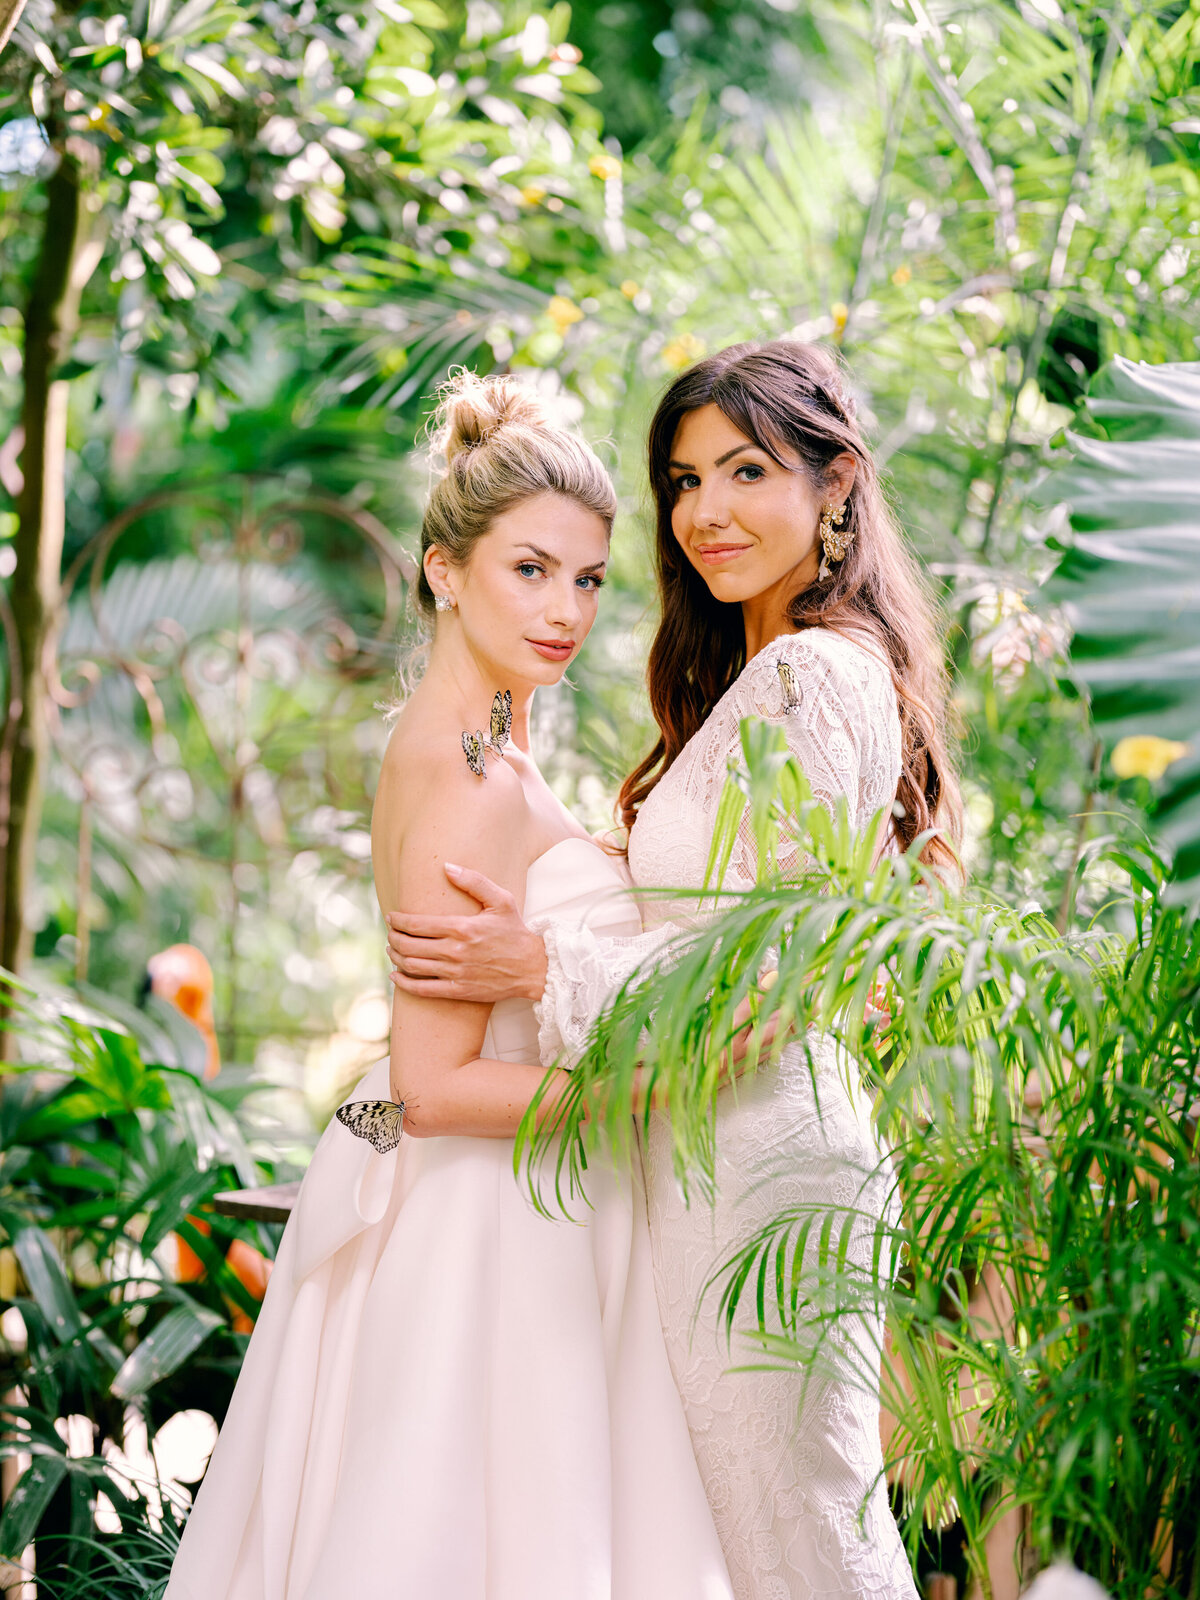 Two brides at their wedding in The Florida Keys